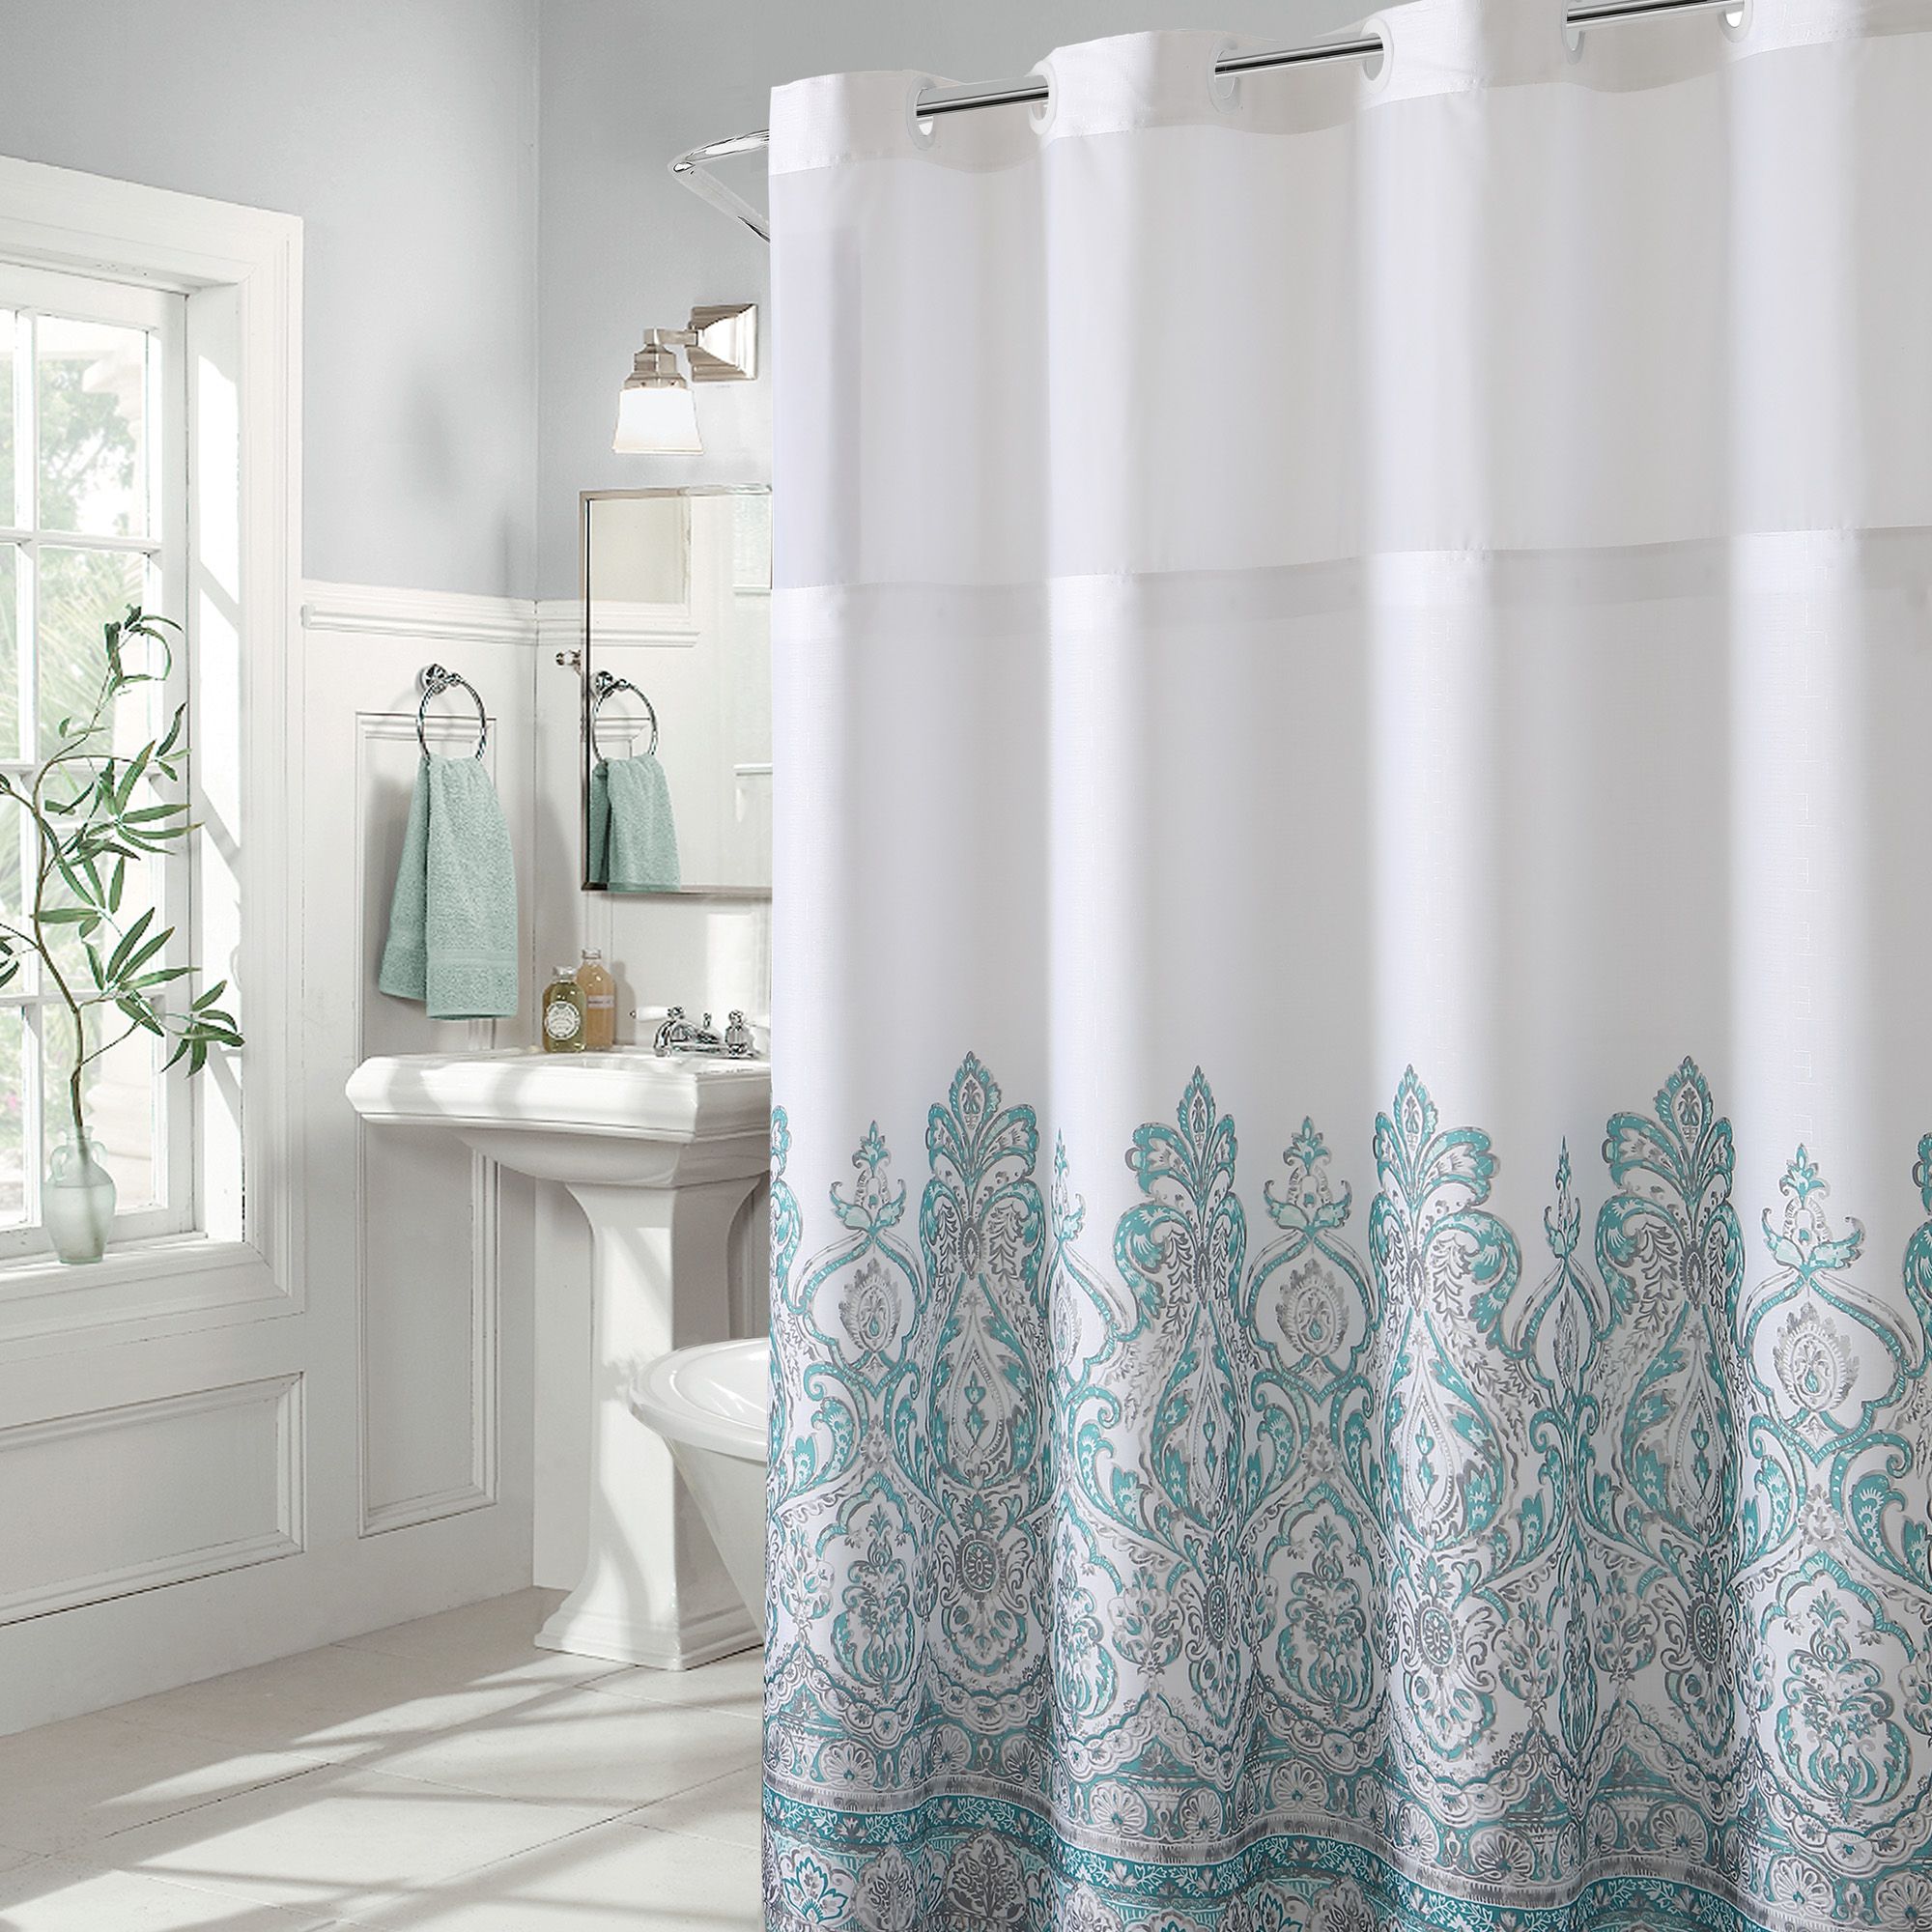 Hookless Damask Border Shower Curtain, Hookless Peva Shower Curtain With Window